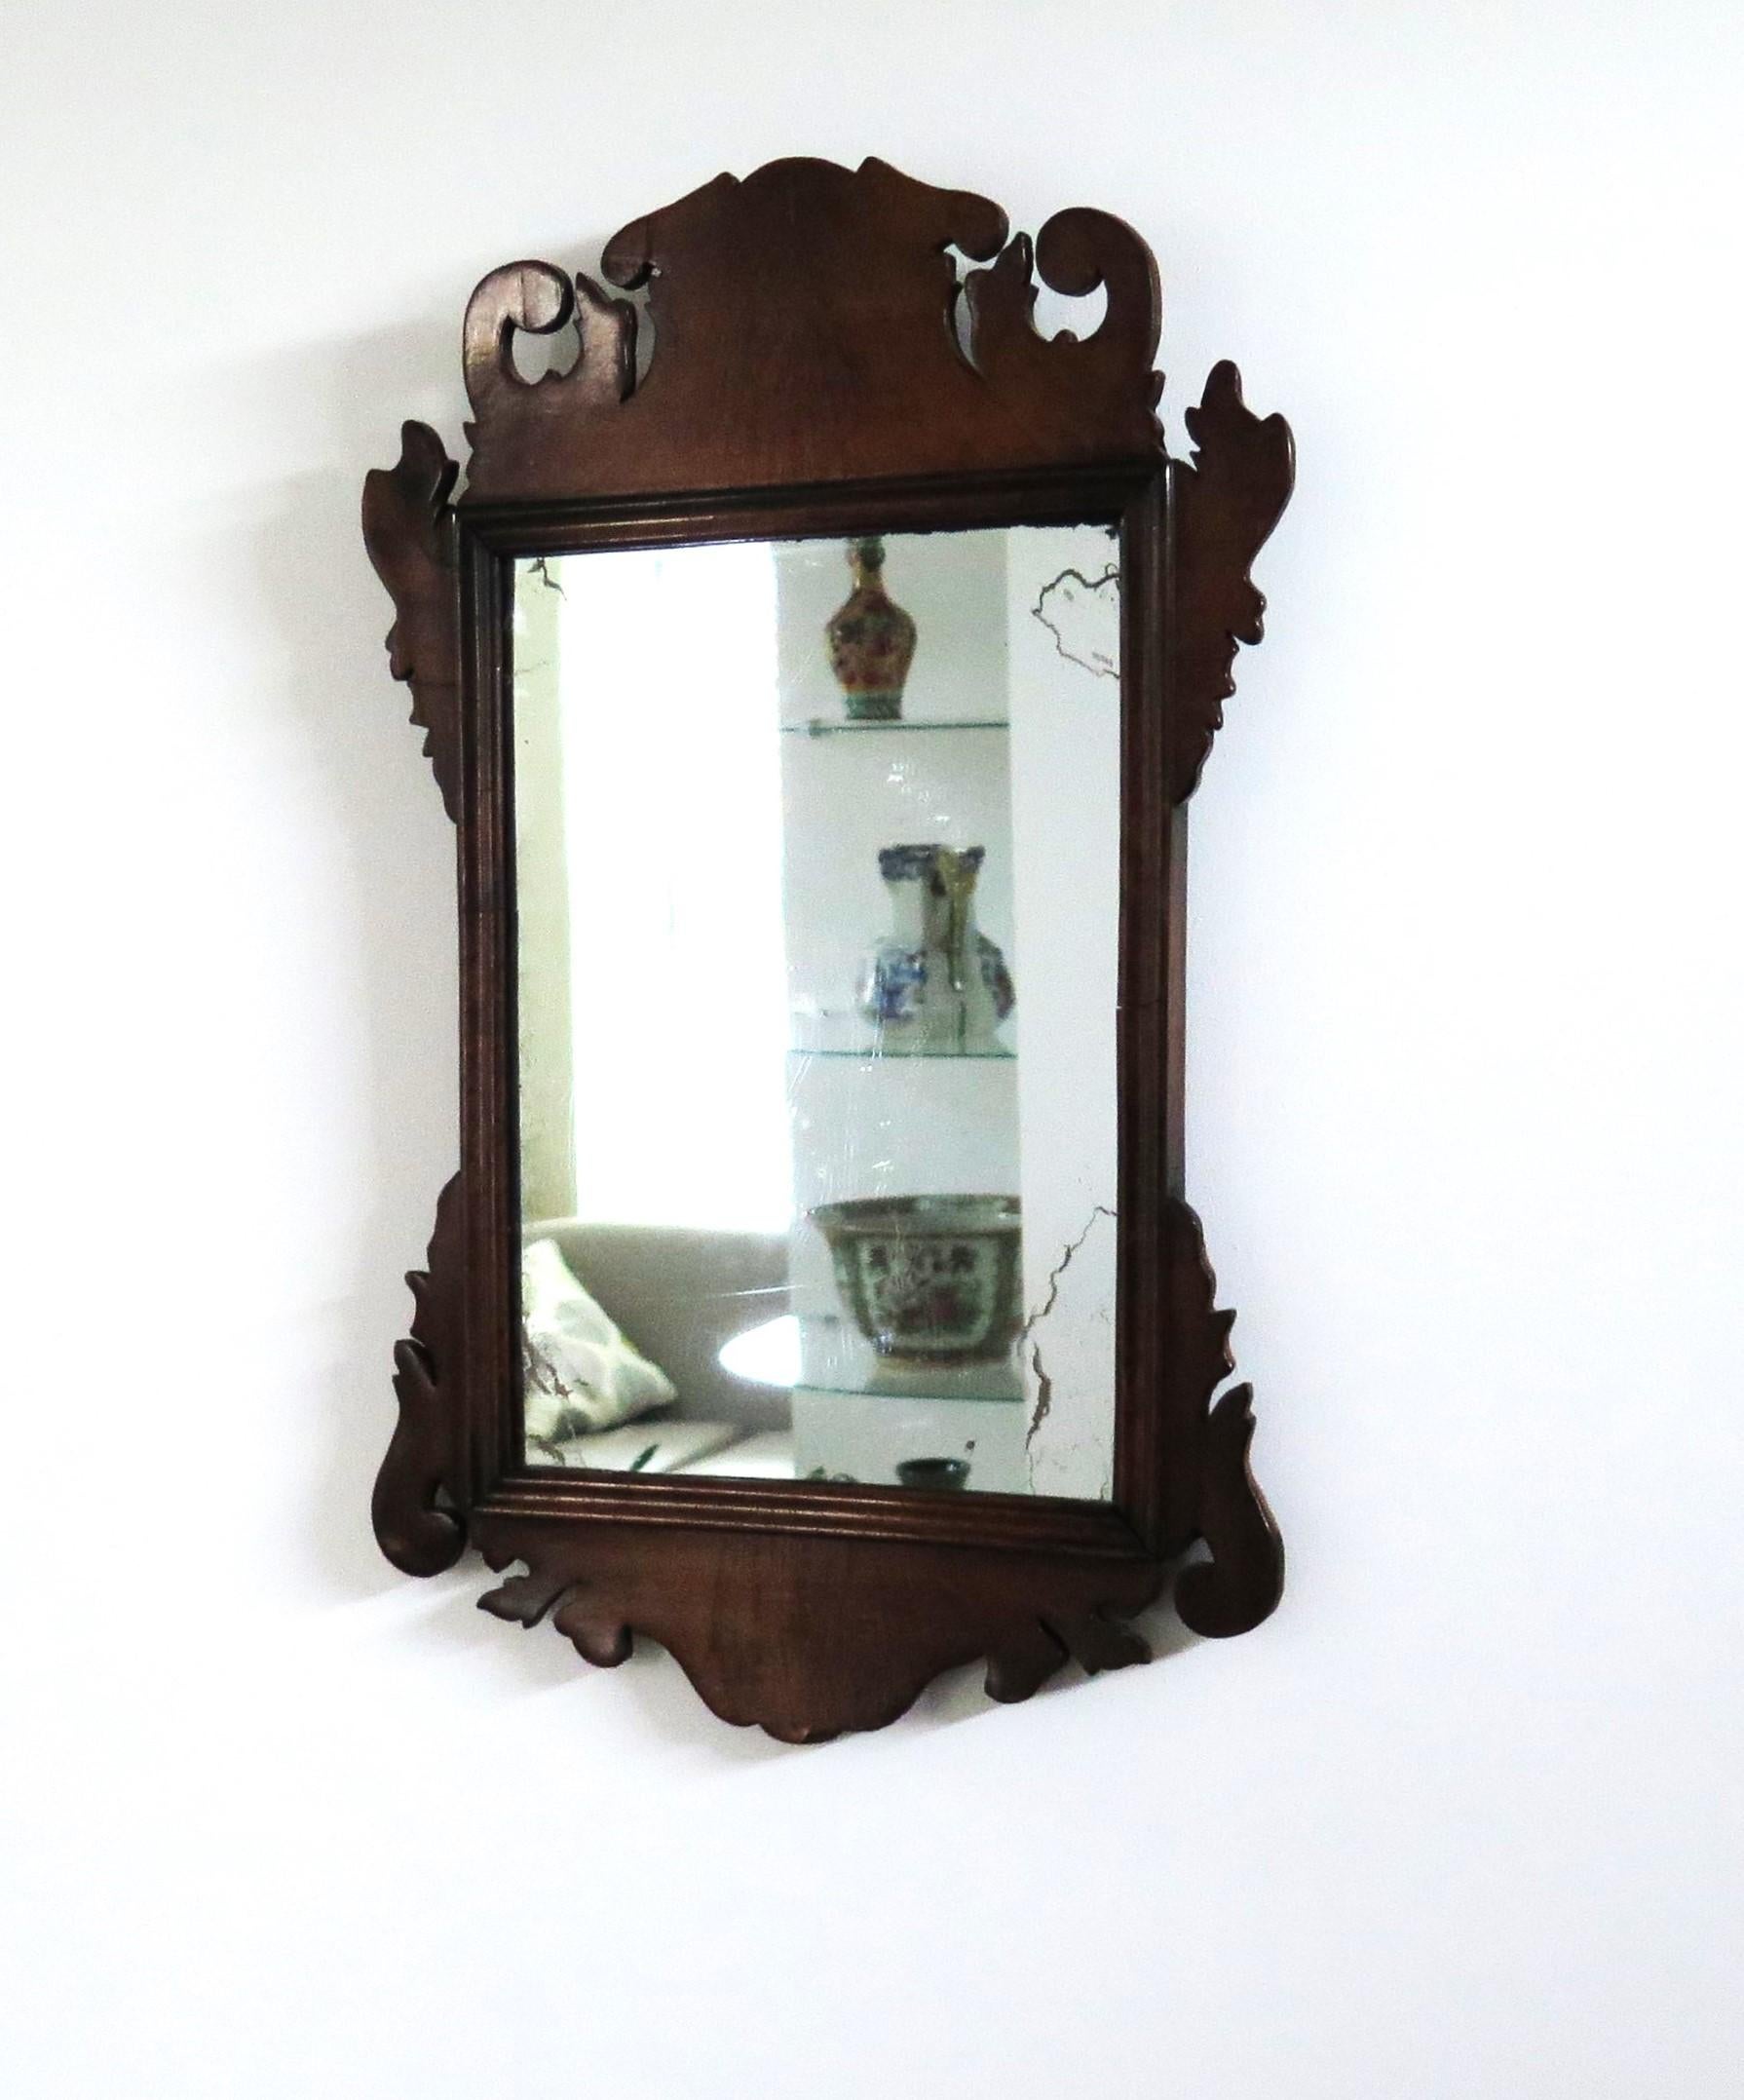 This English hanging wall mirror is from the mid 18th Century, George 11nd period circa 1750.

It has a softwood frame construction, probably pine with hardwood figured walnut veneers to the front, which are all fret-cut, with cresting and base